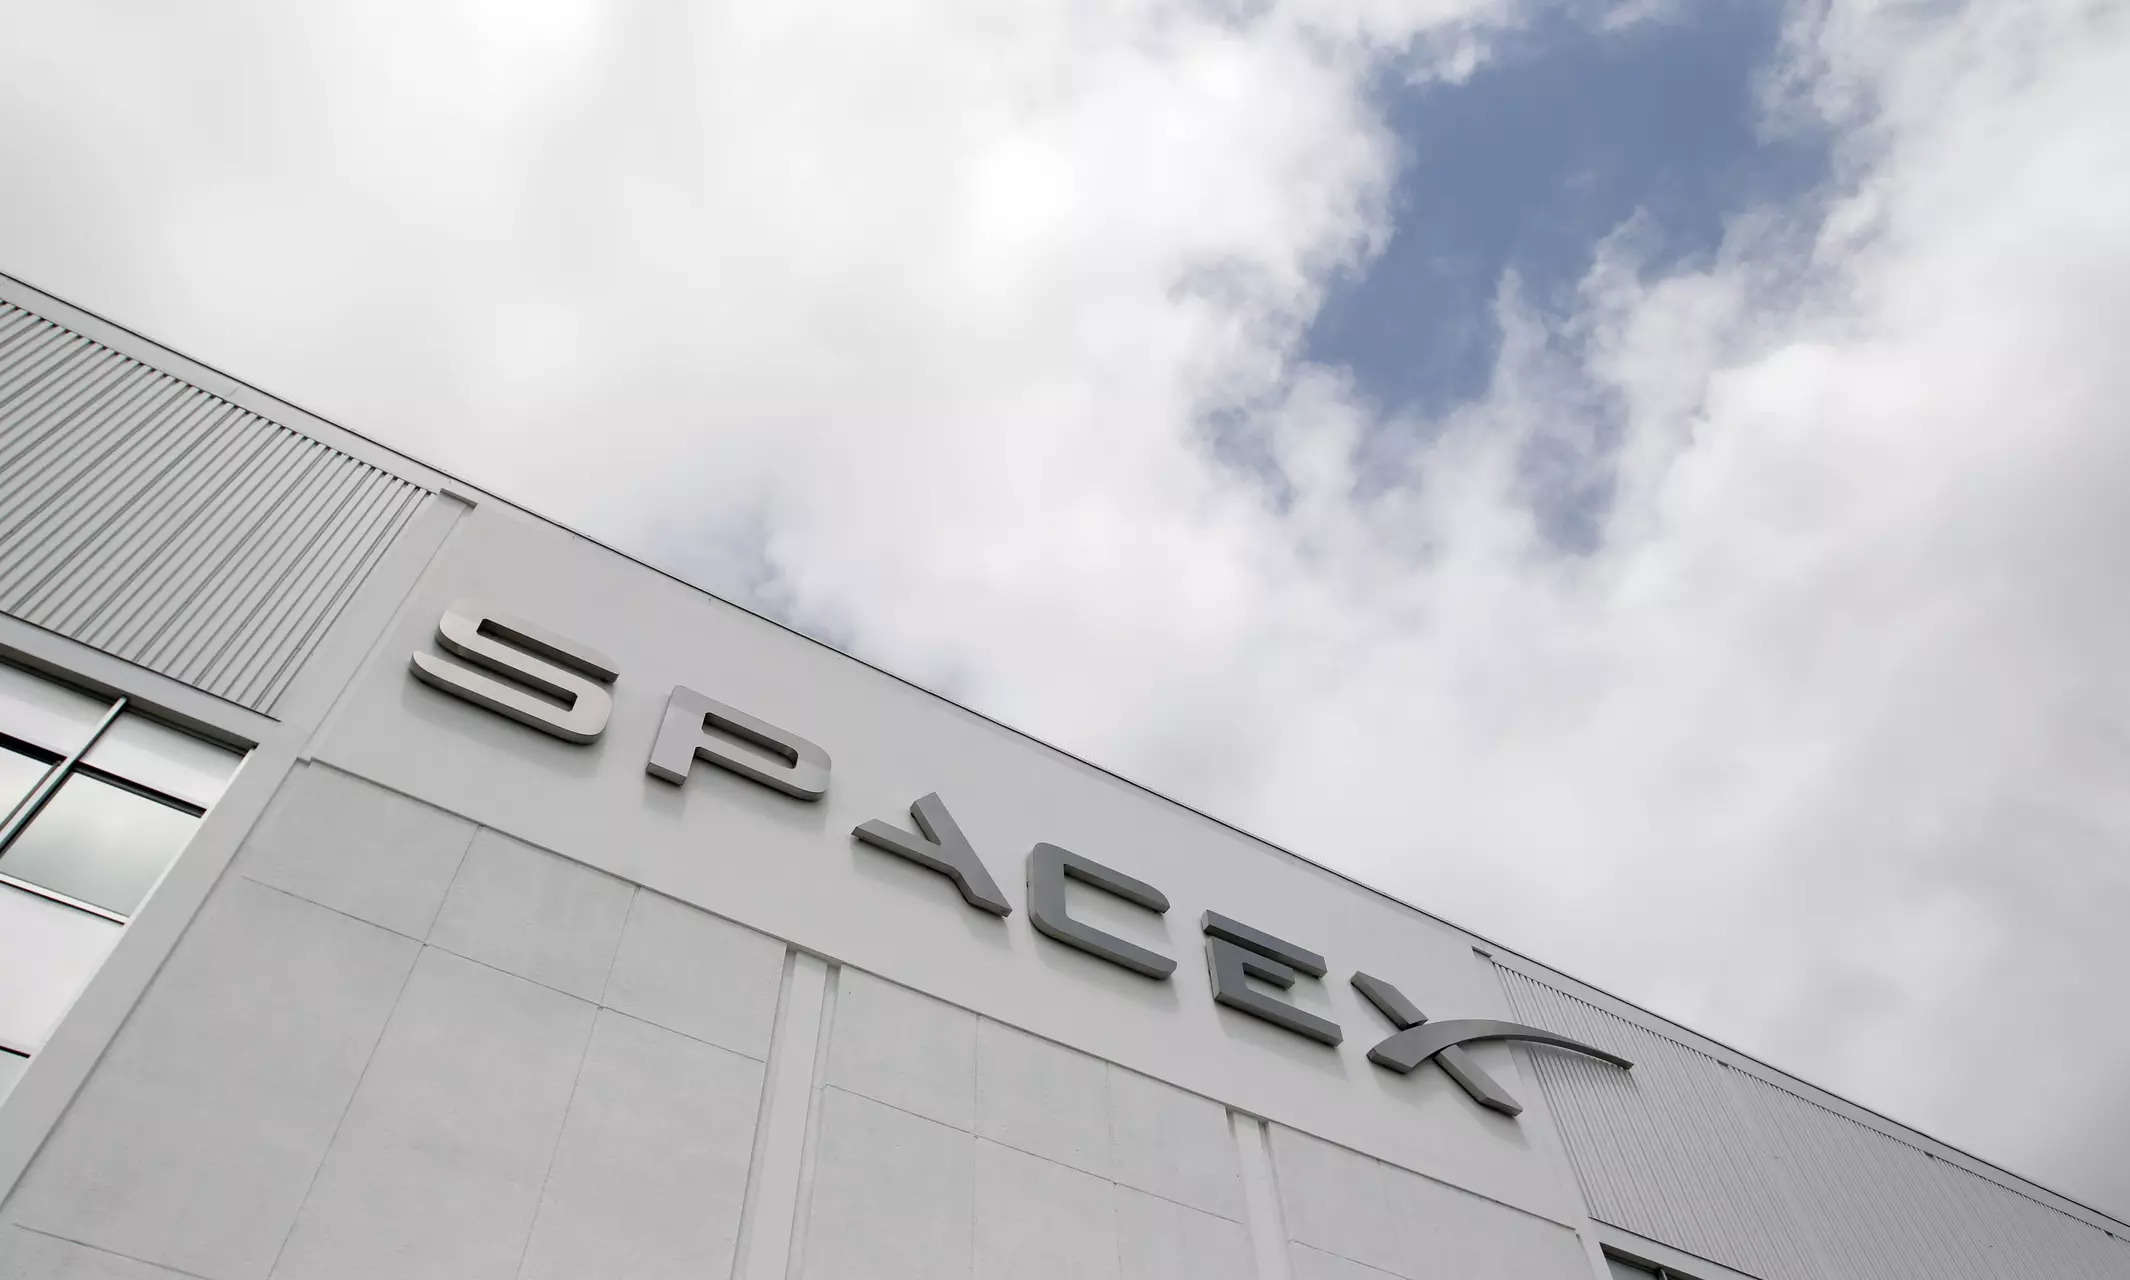 <p>The lawsuit cited a June 2020 post on X, formerly called Twitter, by CEO Musk to his then 36 million followers that said: "U.S. law requires at least a green card to be hired at SpaceX, as rockets are advanced weapons technology."<br /></p>